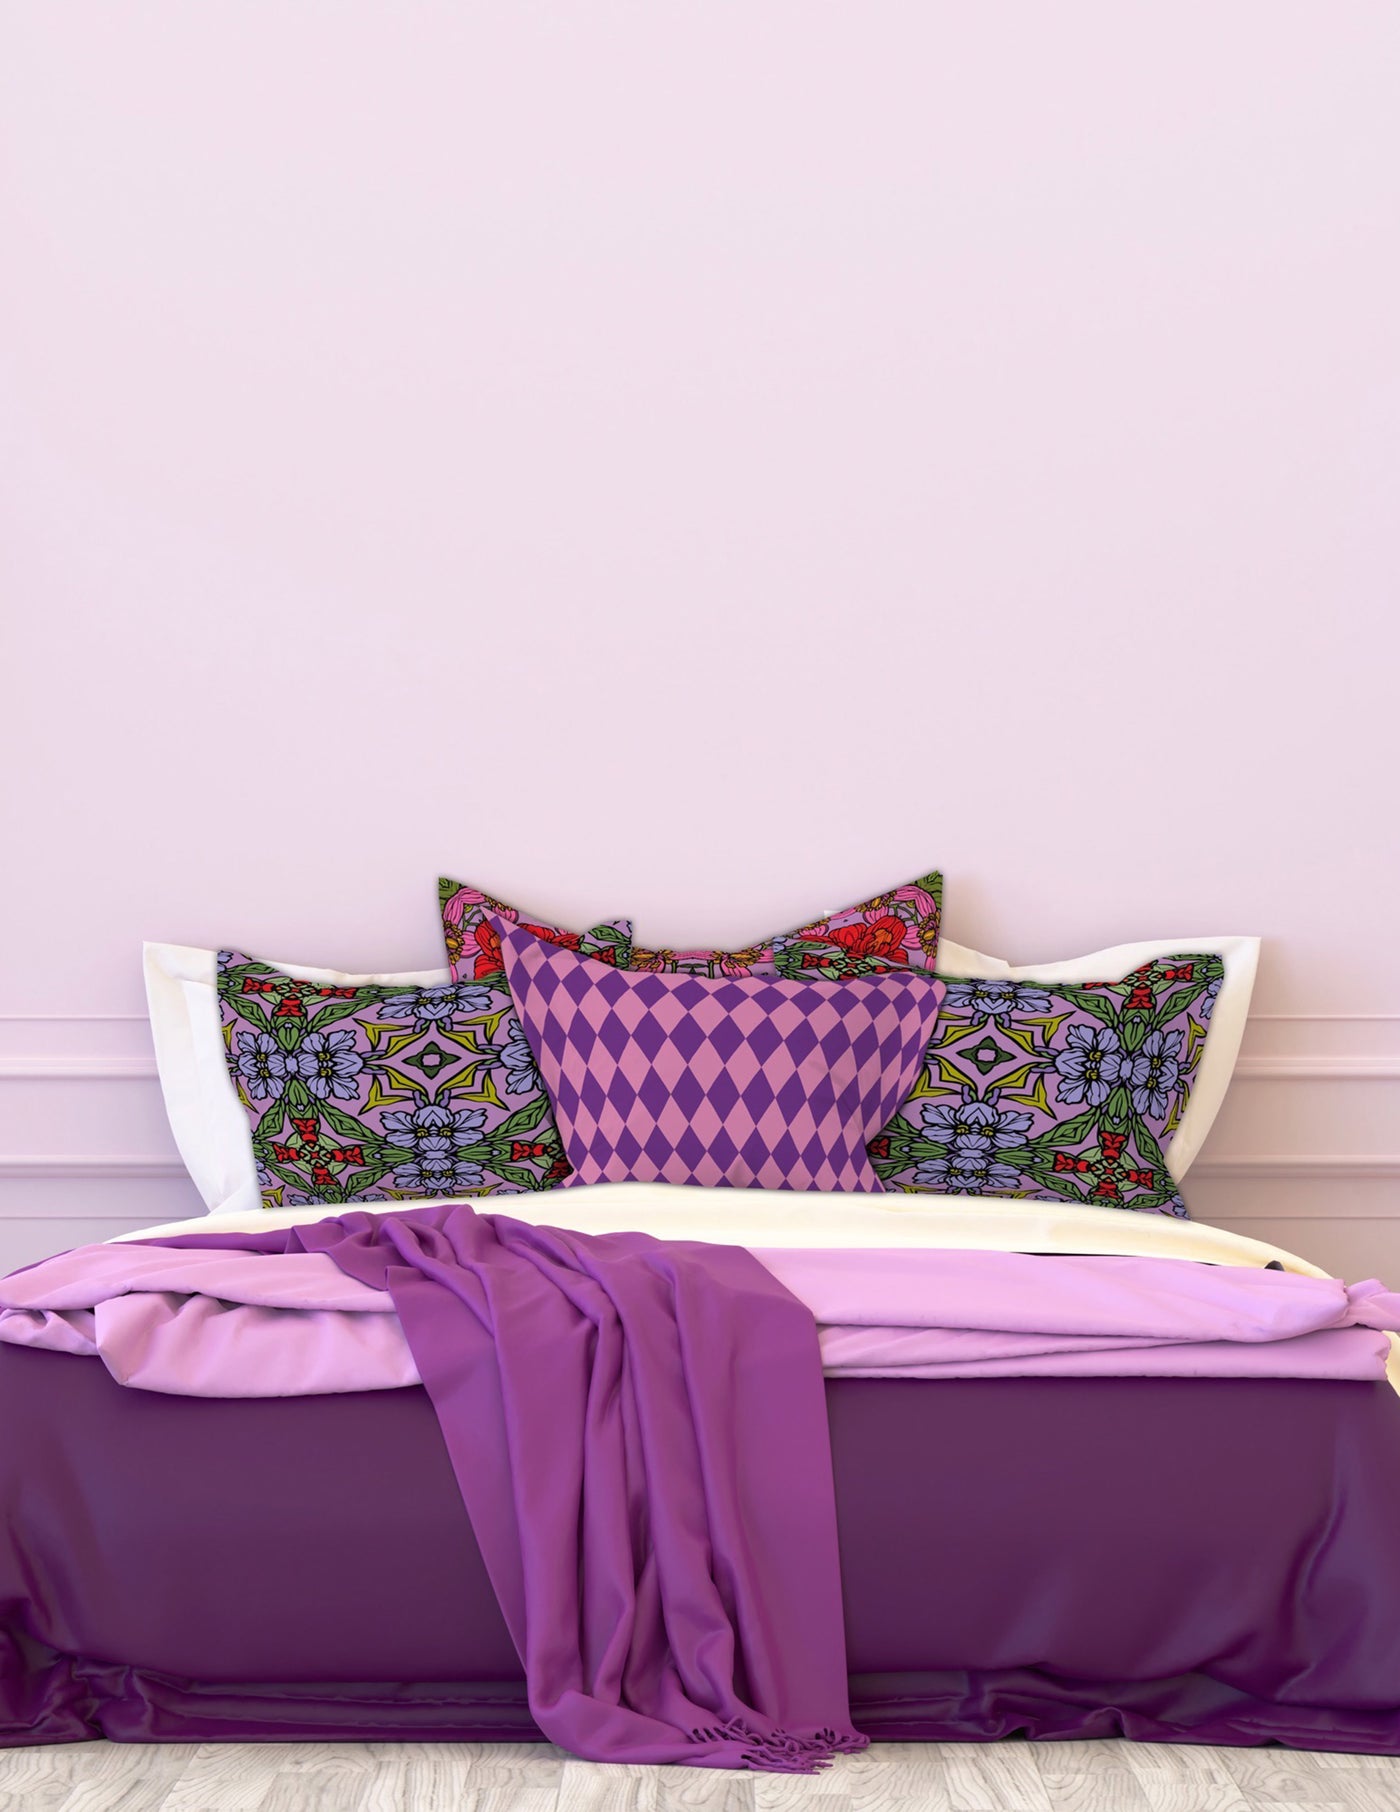 Purple - Pink checkered Bed Pillow